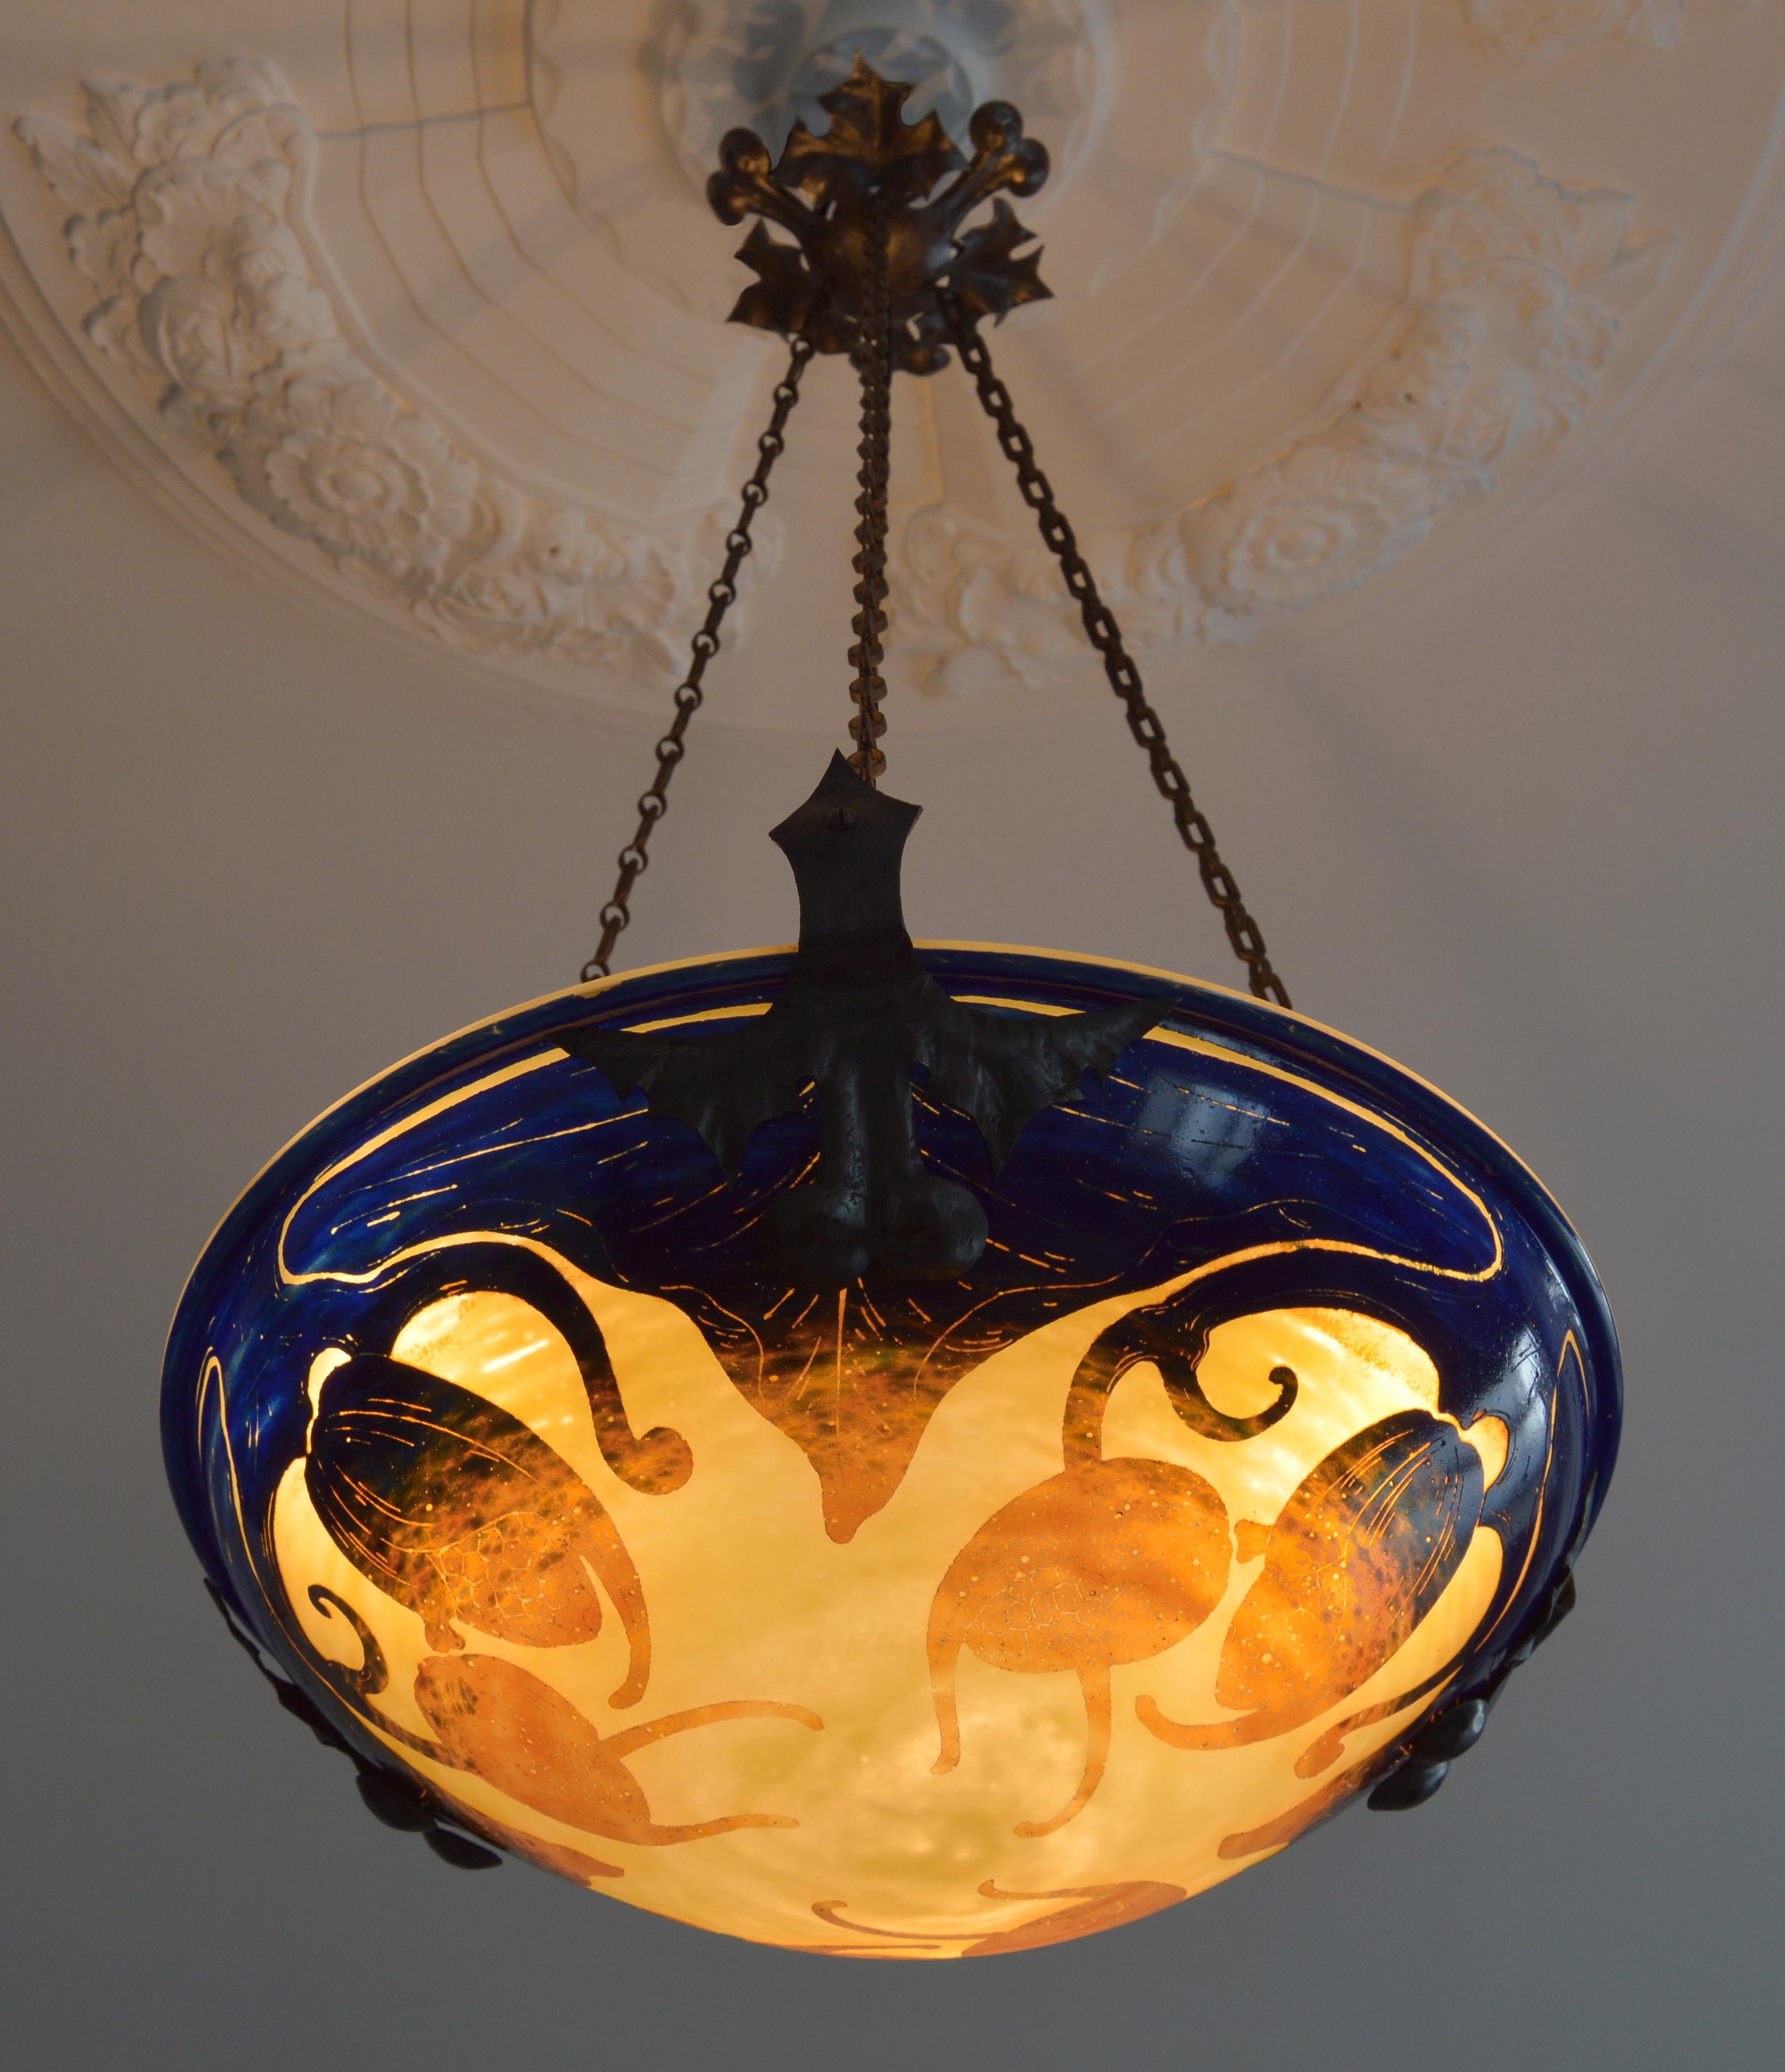 French Art Deco chandelier by Charles Schneider, Epinay-sur-Seine (Paris), 1922-1925. Yellow glass overlaid with orange changing to blue at the top. Houblon pattern acid-etched that comes hung at its genuine and elegant wrought iron fixture by